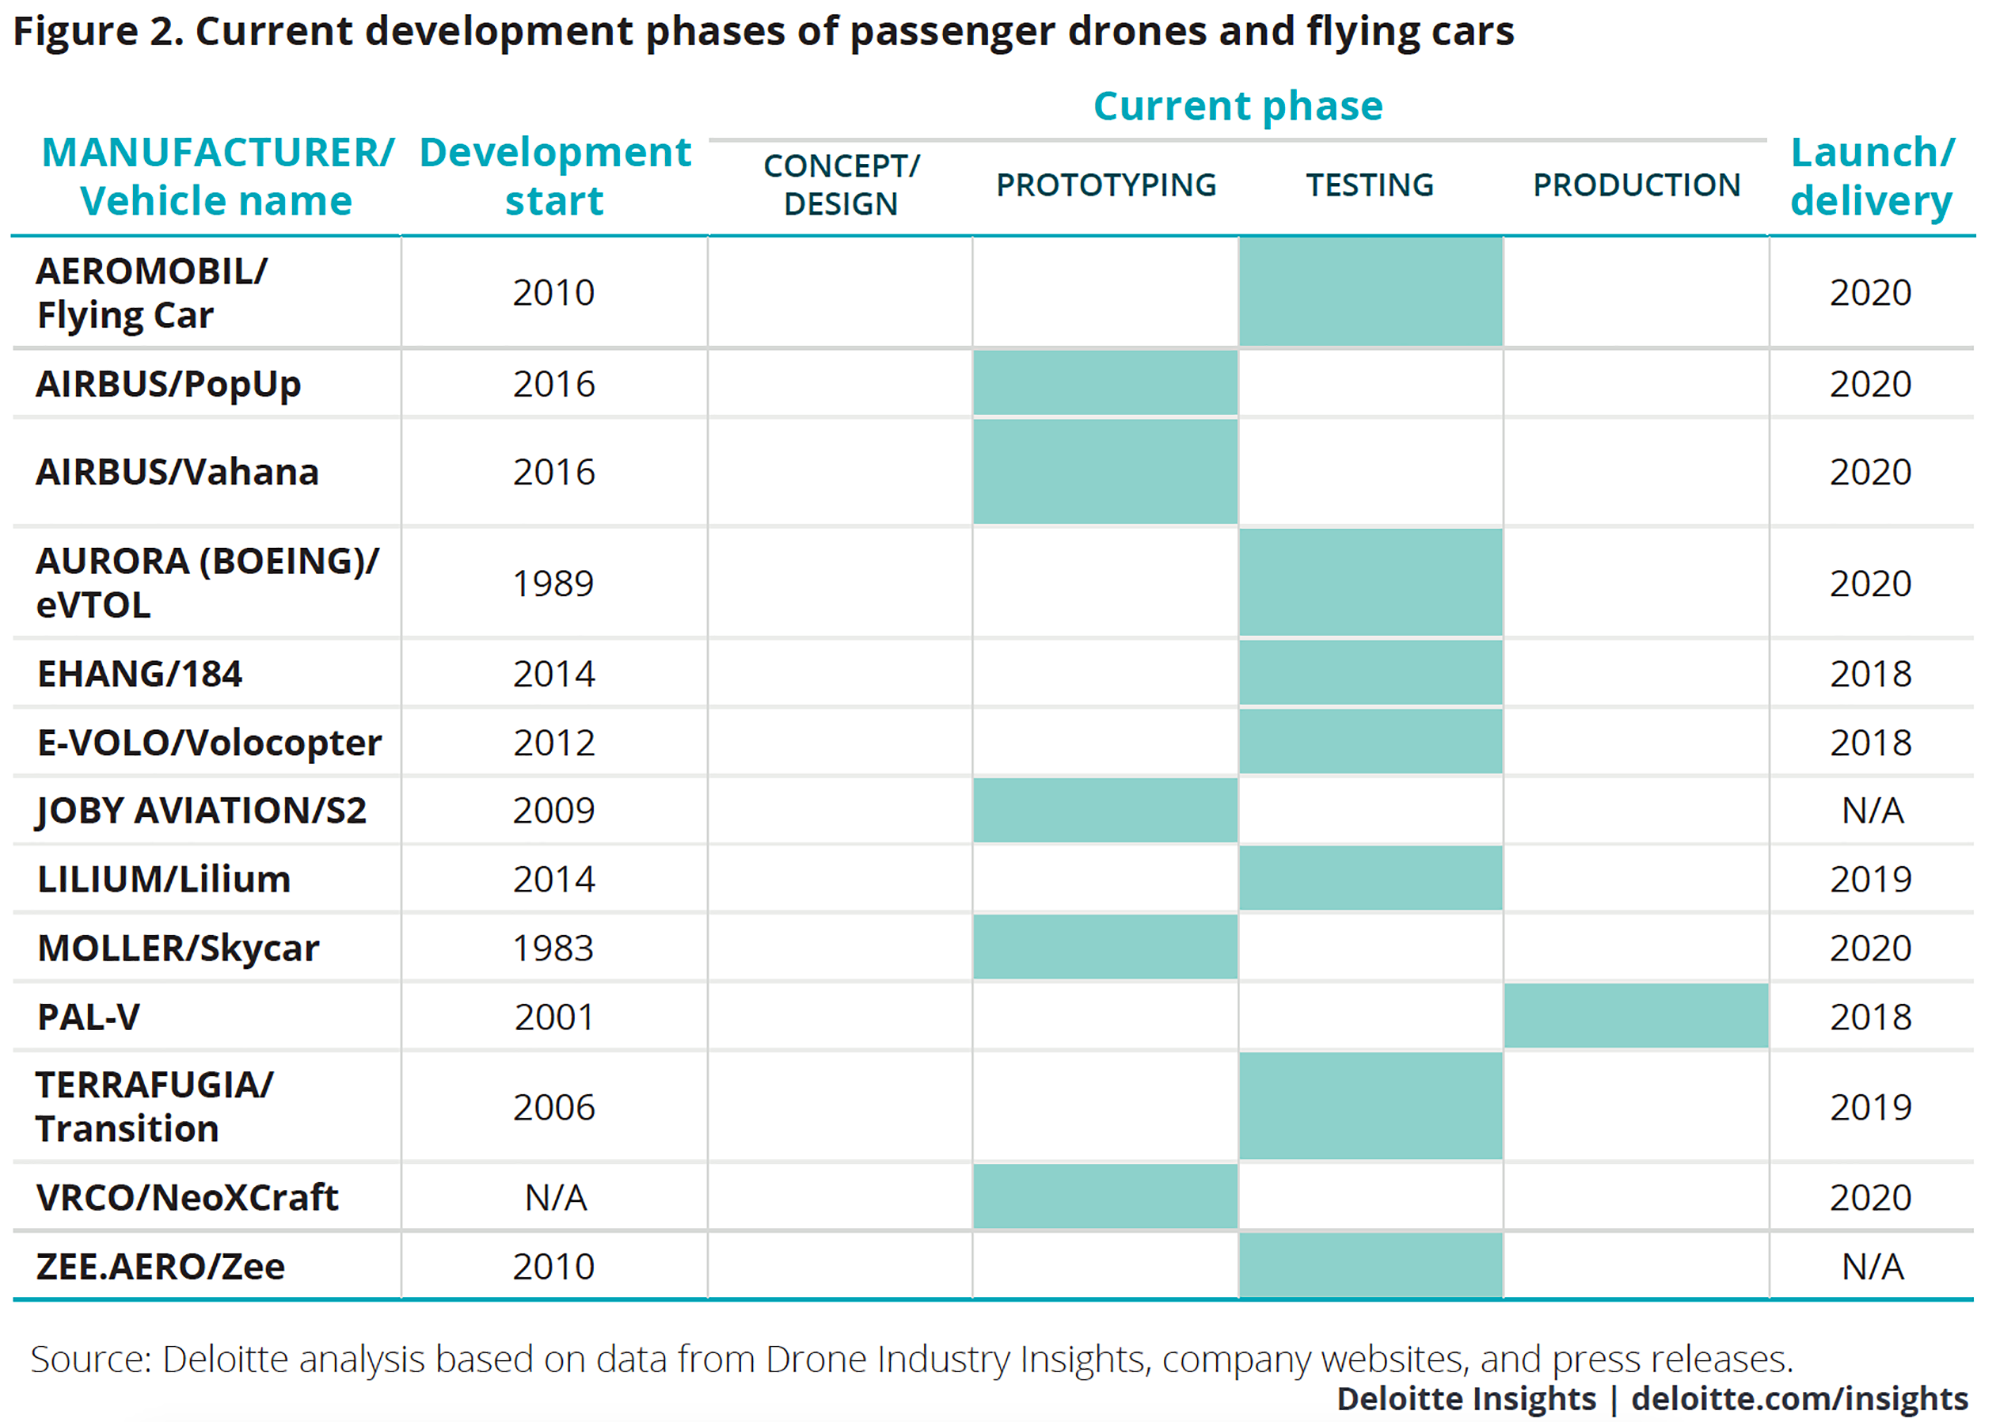 Current development phases of passenger drones and flying cars